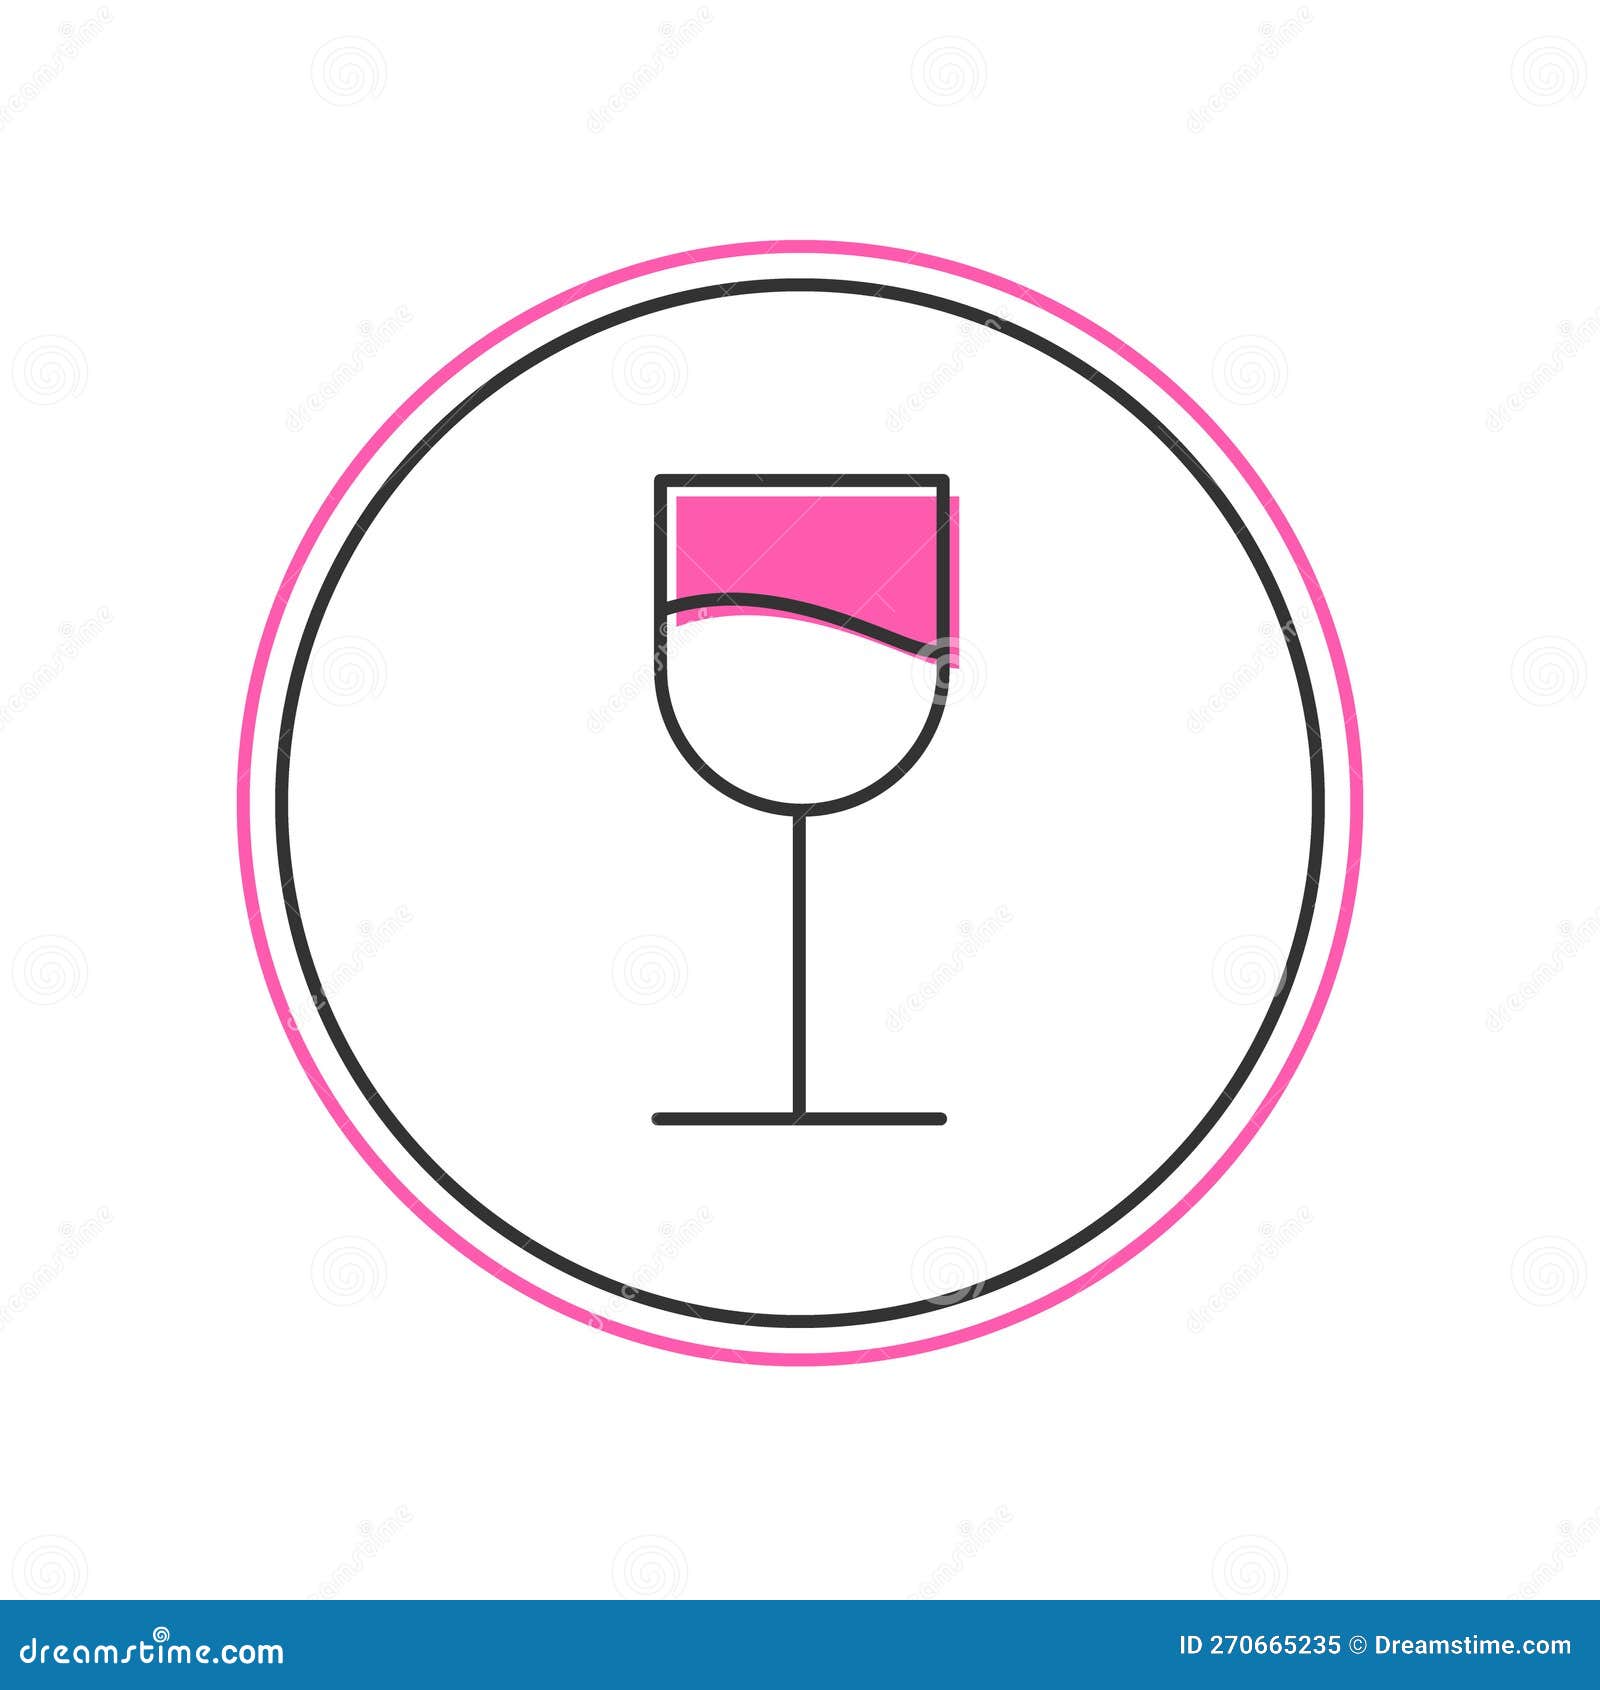 Filled Outline Wine Glass Icon Isolated on White Background. Wineglass ...